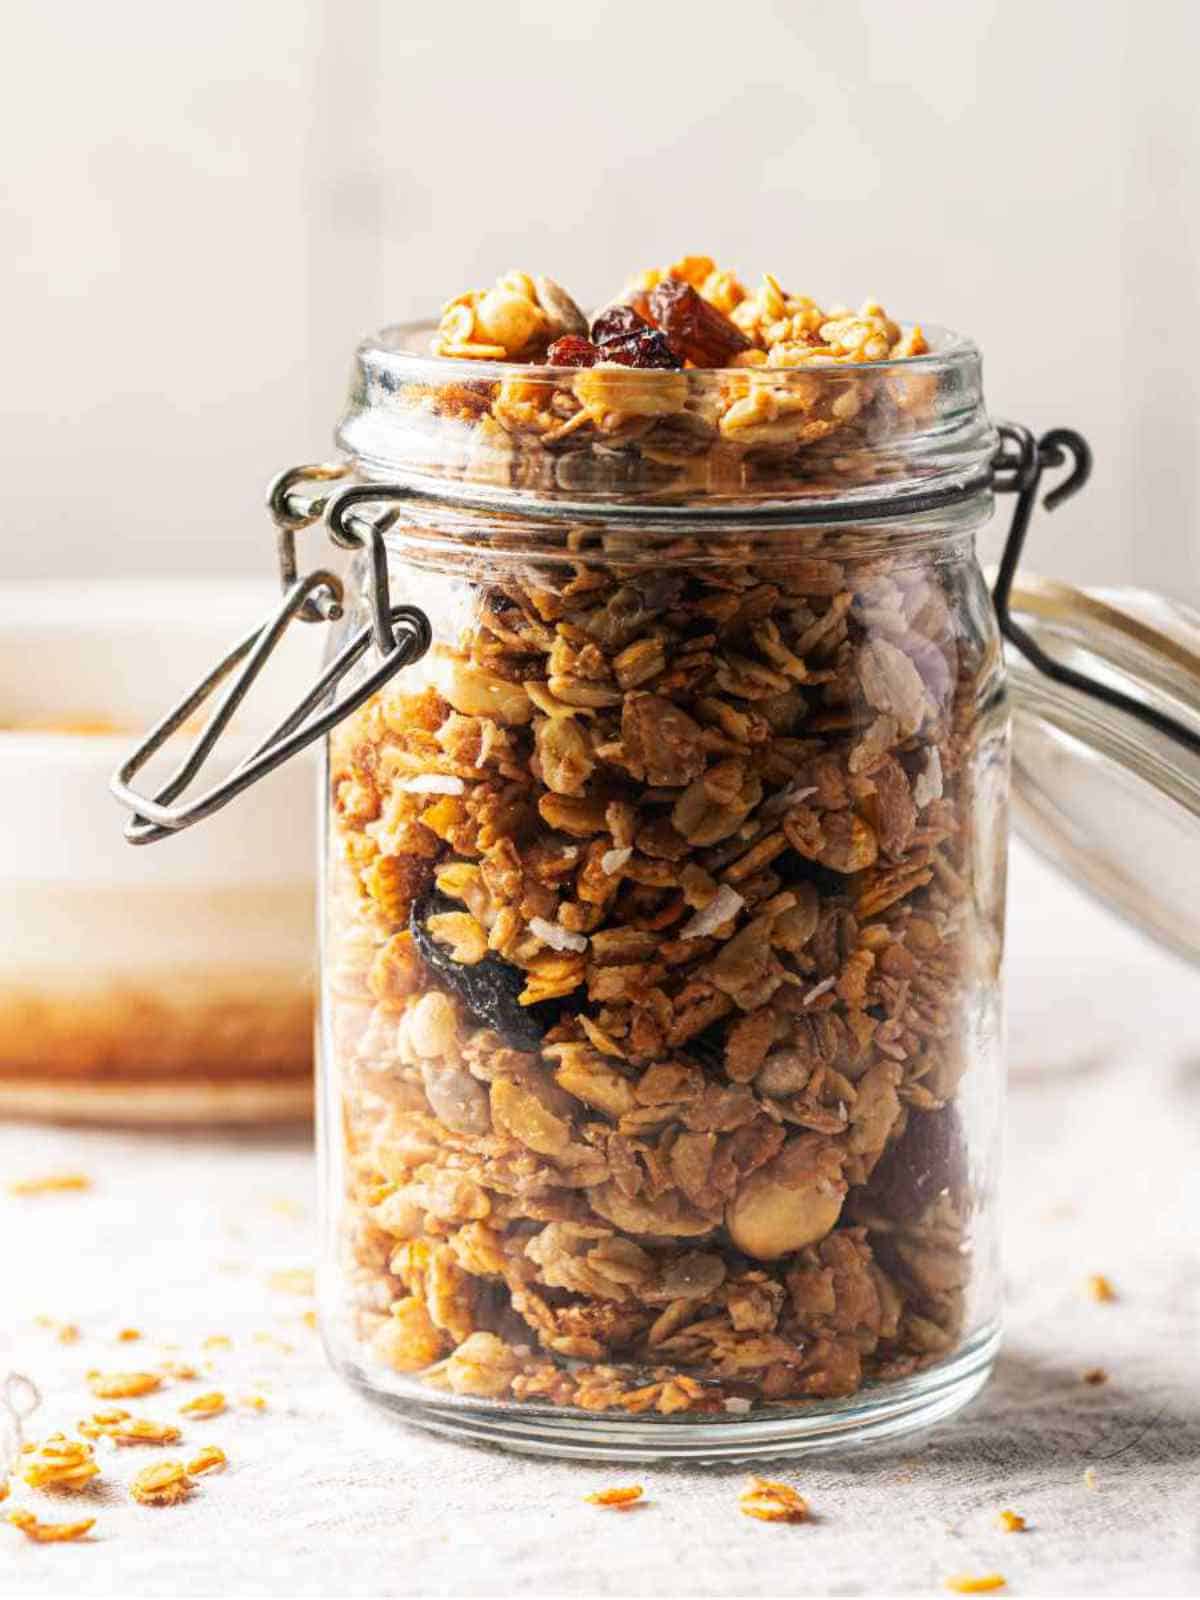 Delicious homemade granola in glass jar on white background.